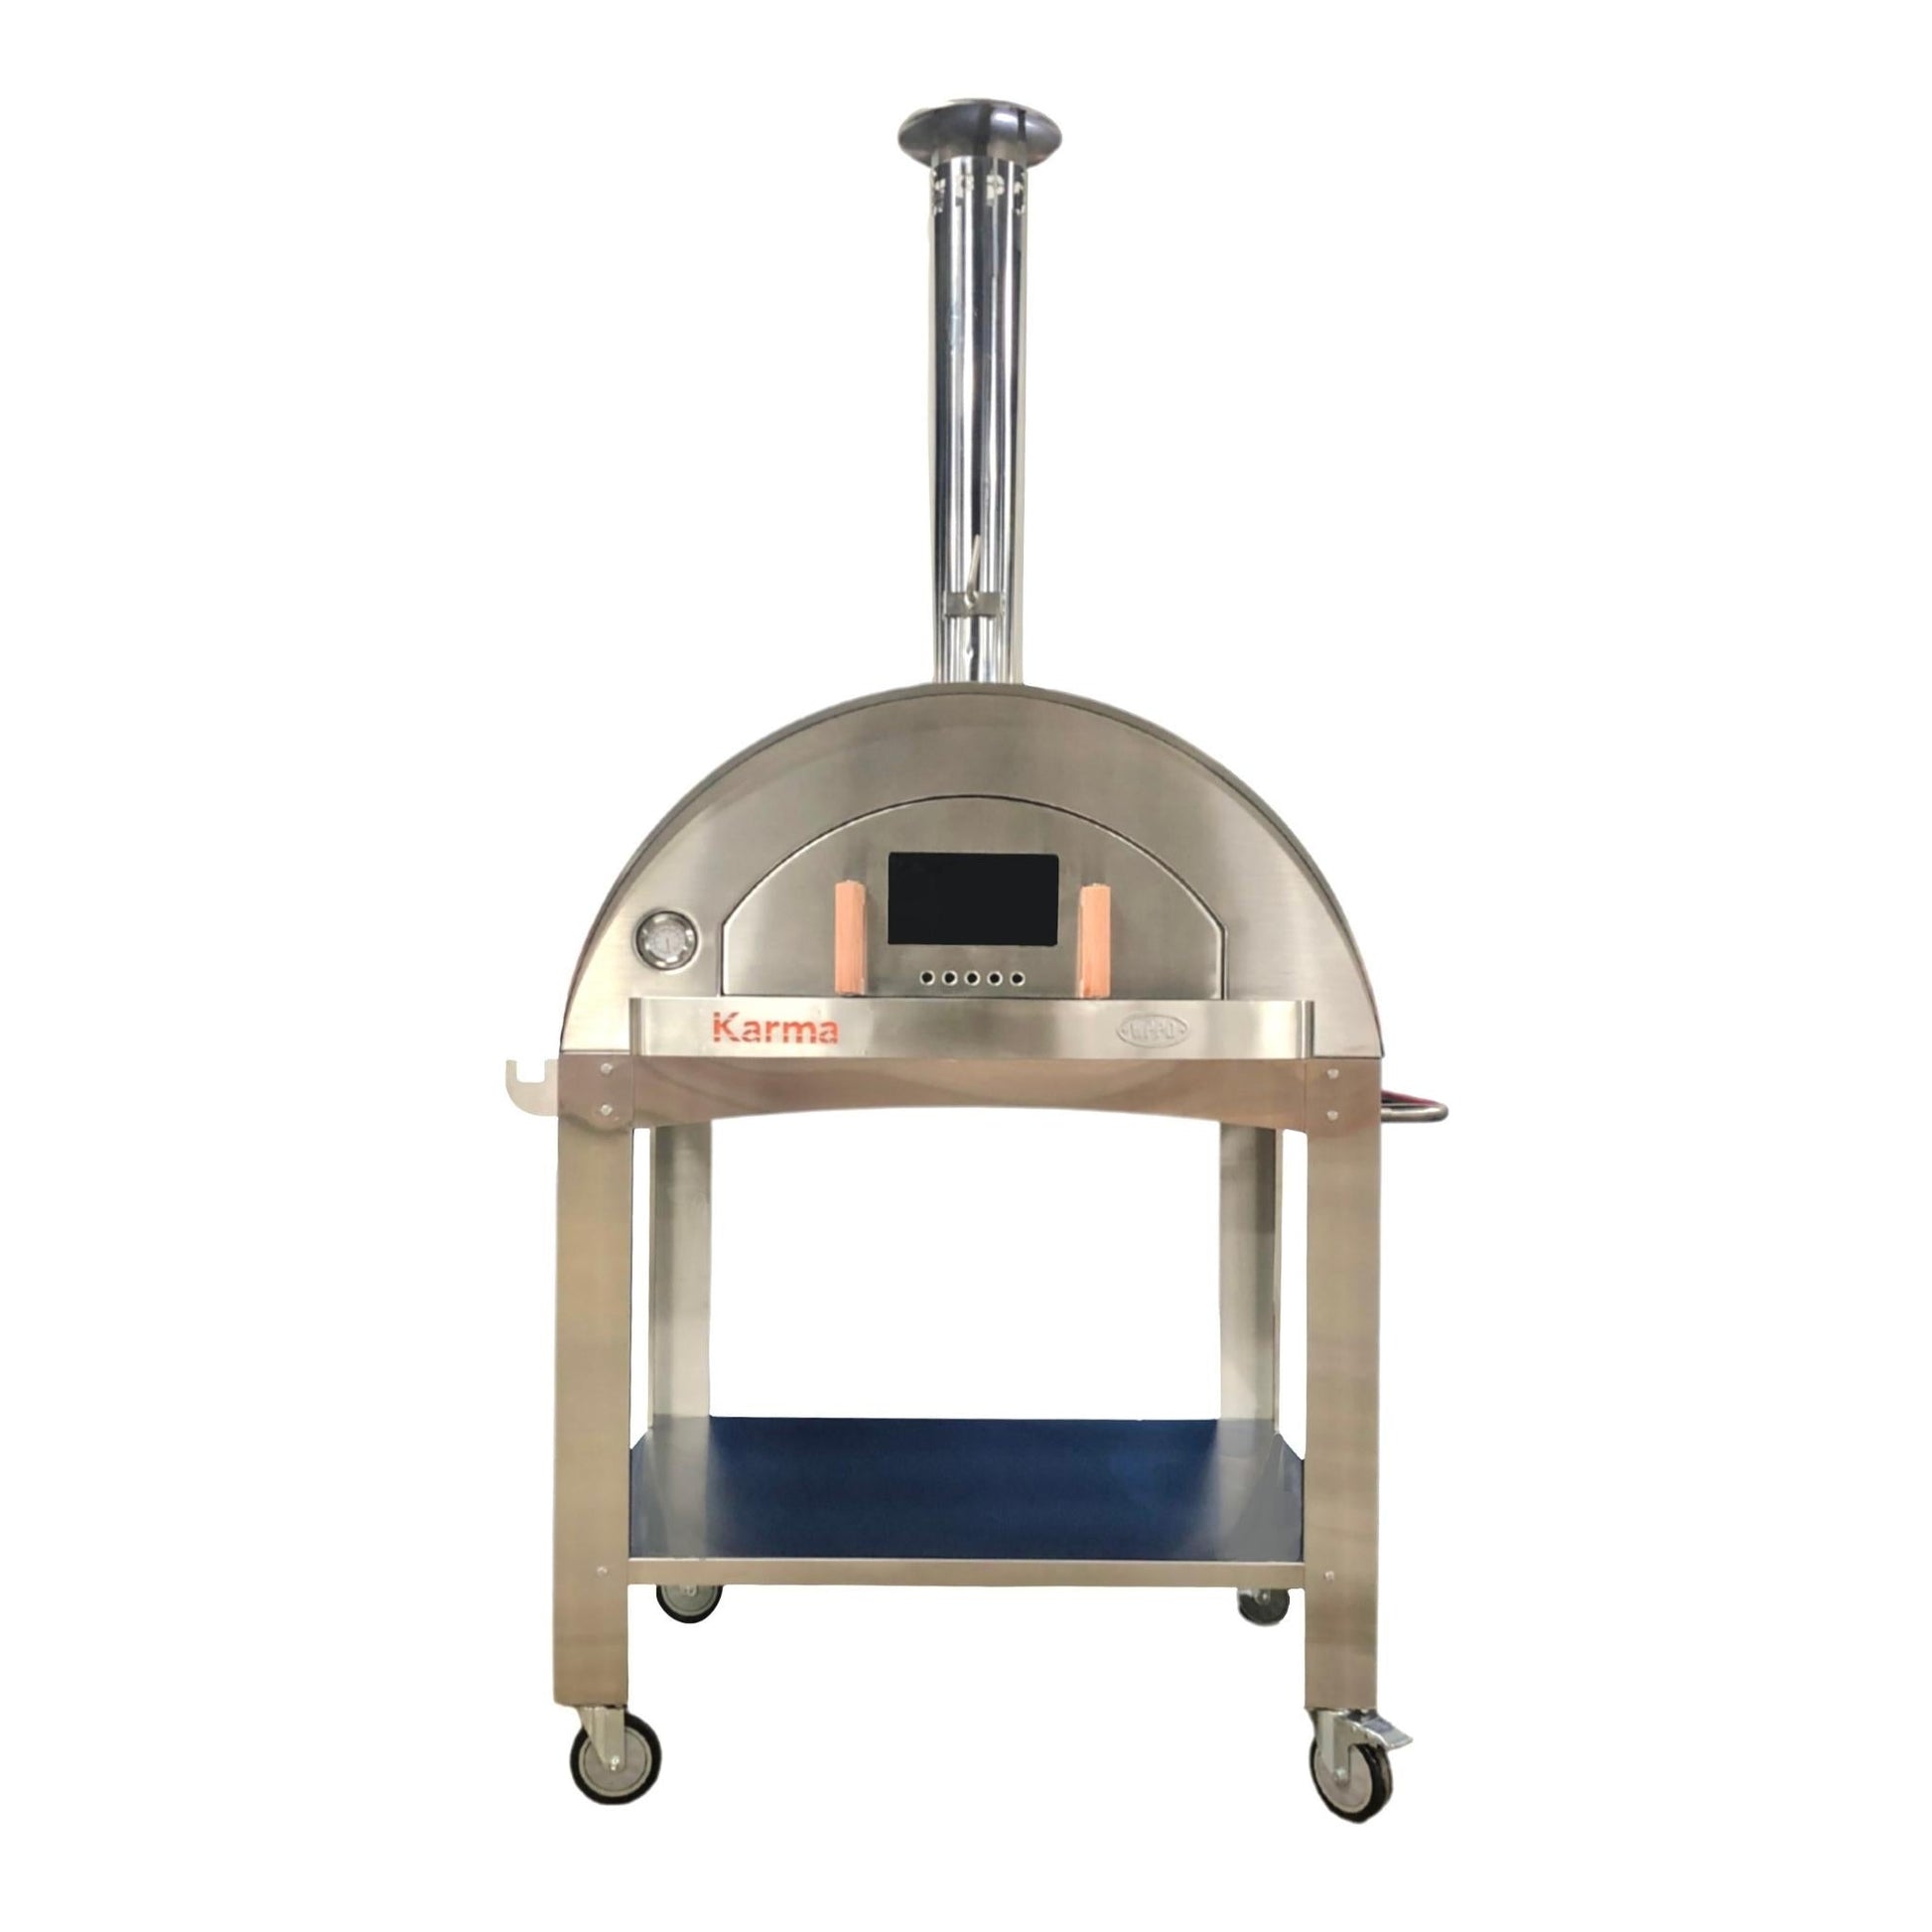 Main image of the WPPO™ Karma 42 Premium Stainless Steel Pizza Oven (SKU: WKK-03S-304SS) with a solid white background